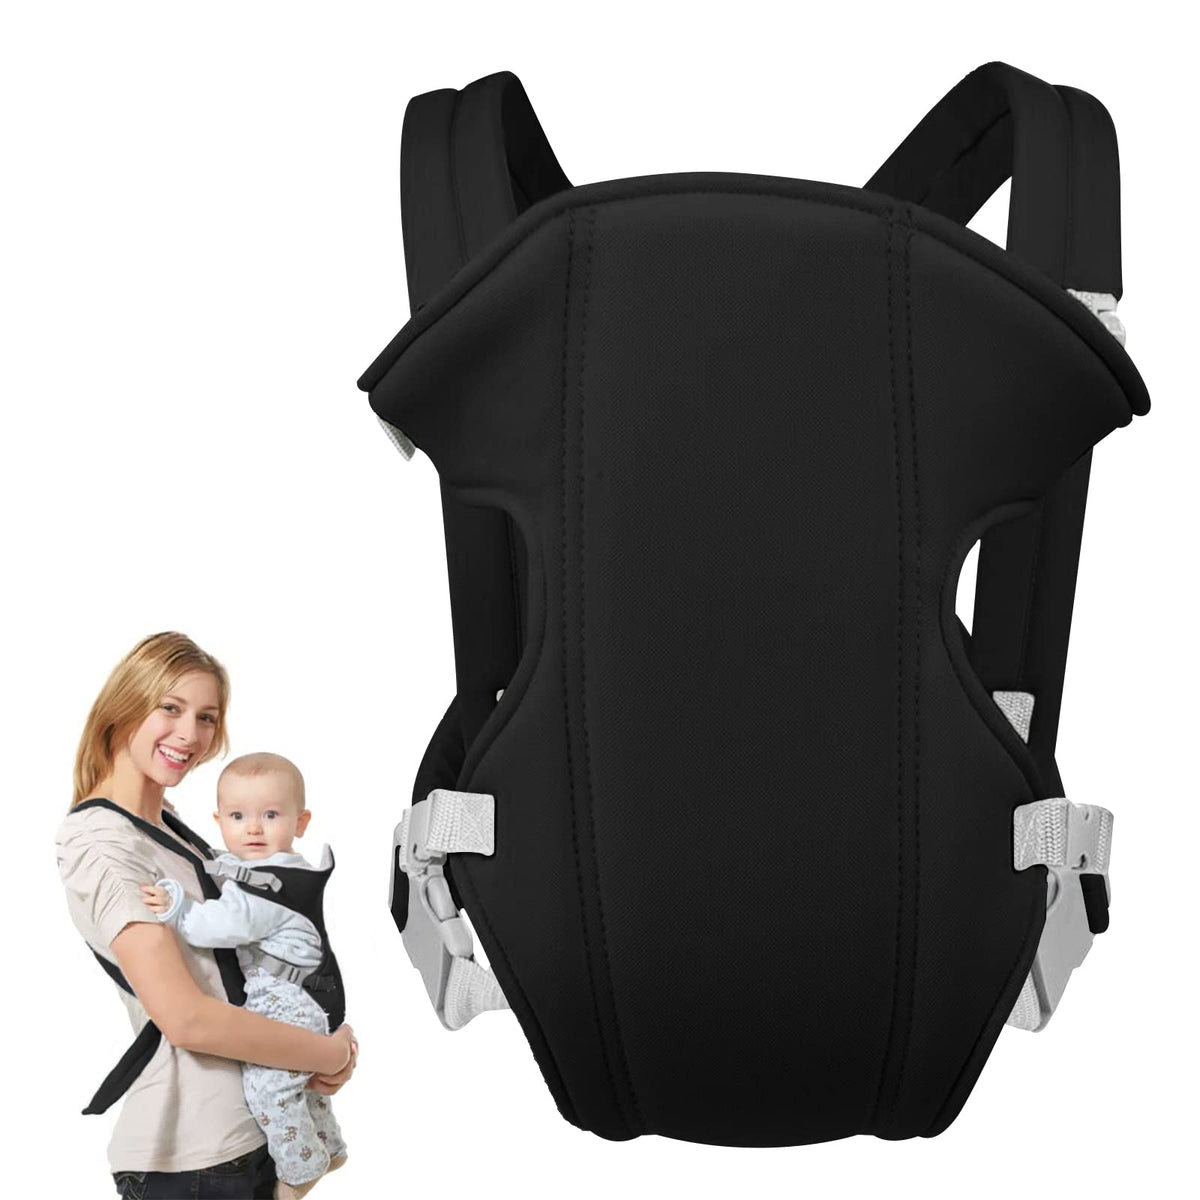 Baby Carrier,Xiuyer Baby Wrap Carrier,3-in-1 Front and Back Toddler Sling Carrier,Toddler Back Carrier for 3.5-15 Kg,Adjustable Baby Carrier Backpack,Black Baby Carriers